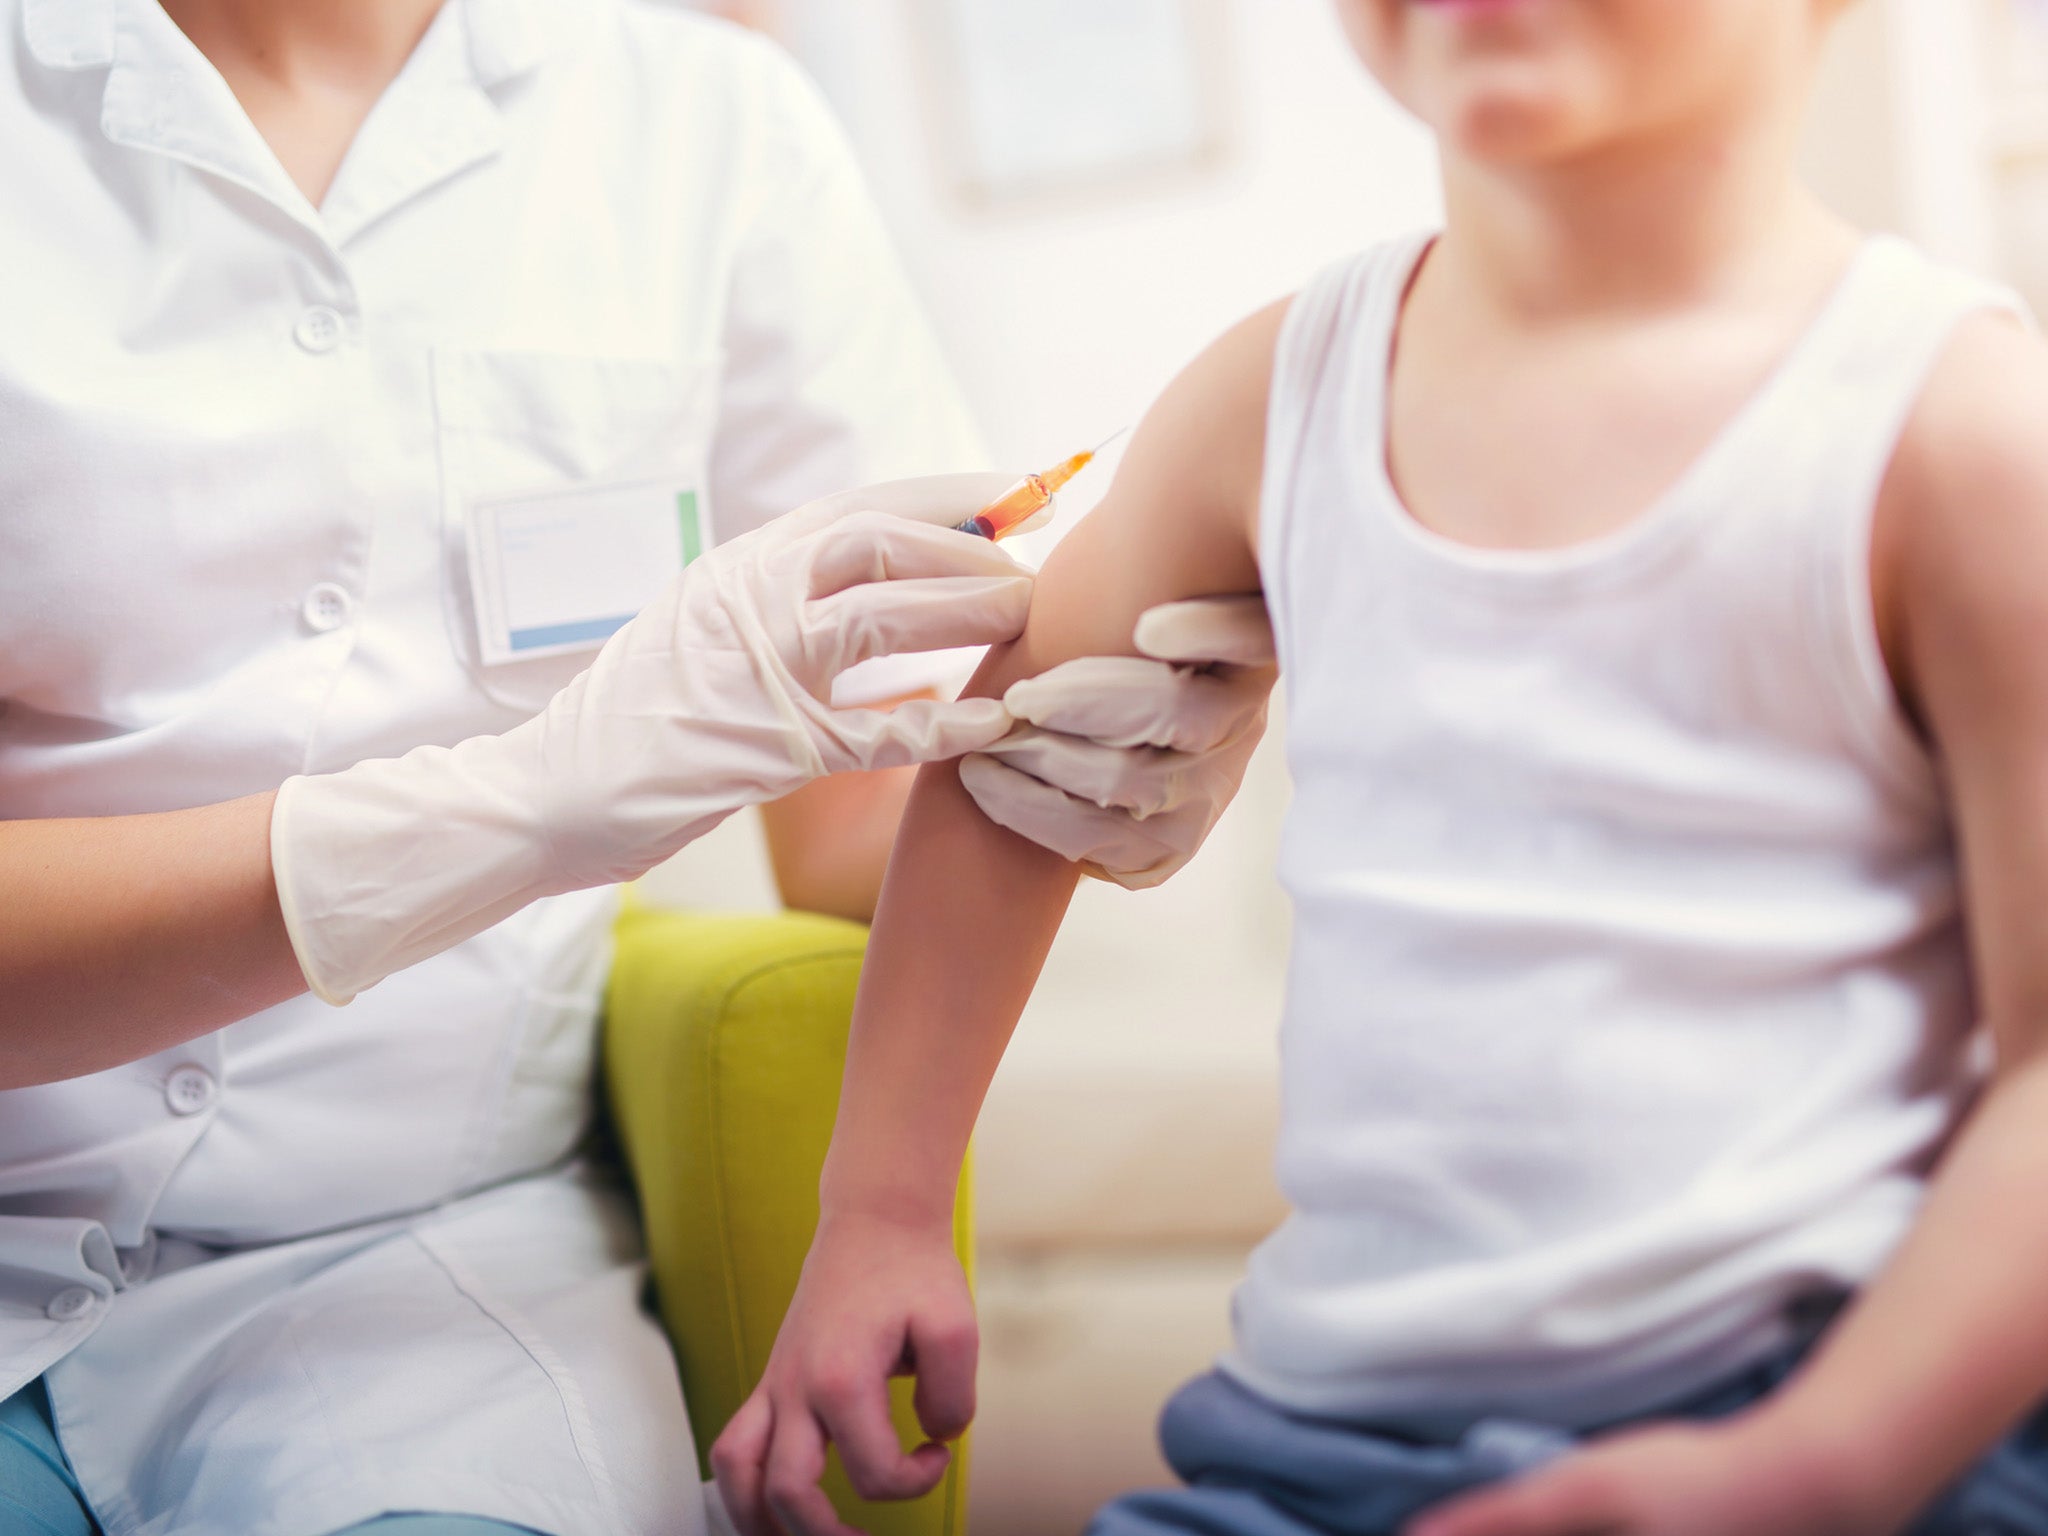 New York set to ban religious exemptions for vaccinations